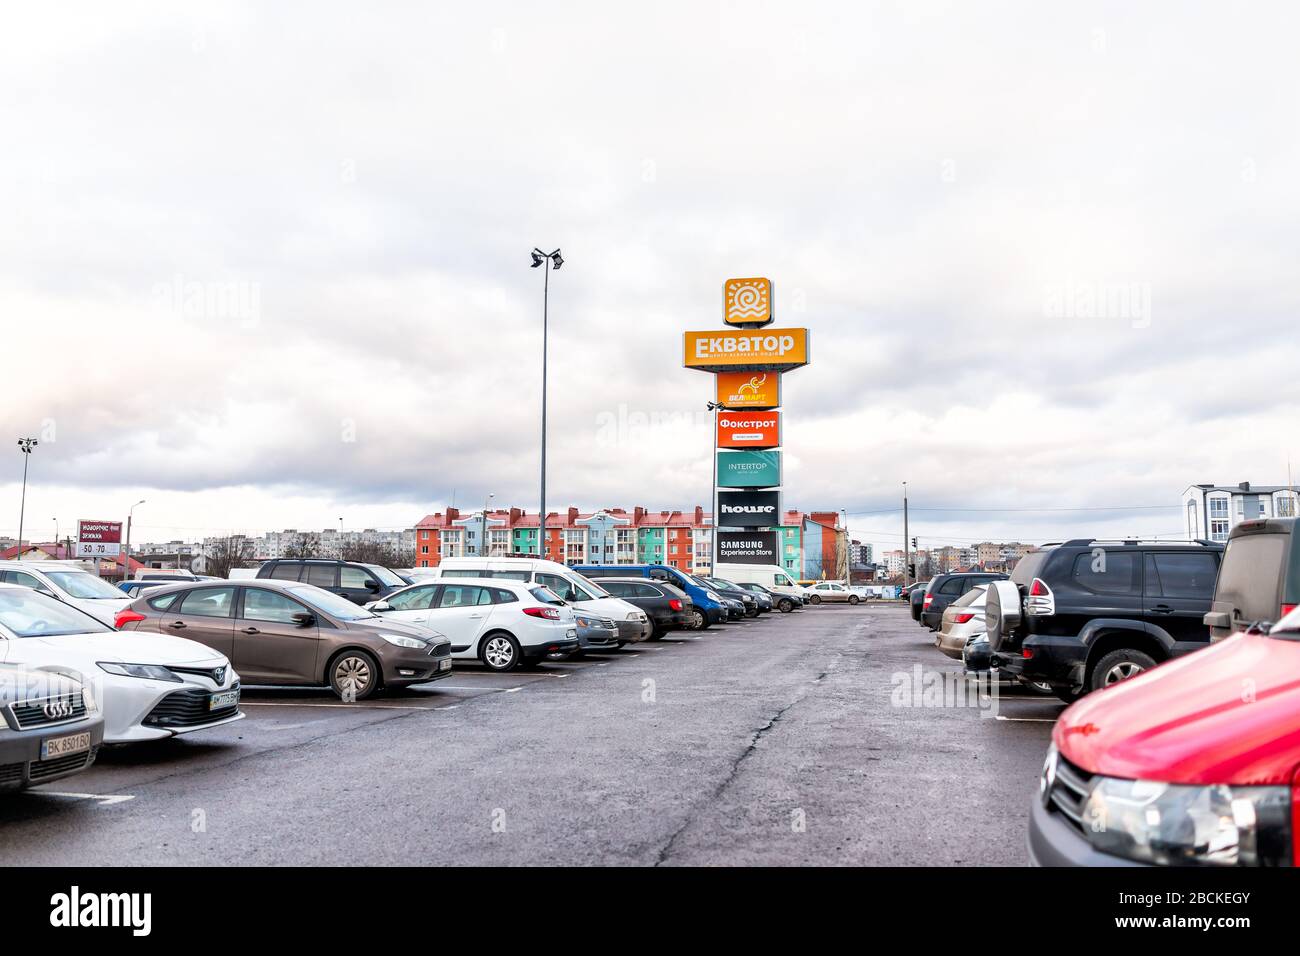 Shopping Mall Parking Lot High Resolution Stock Photography And Images Alamy